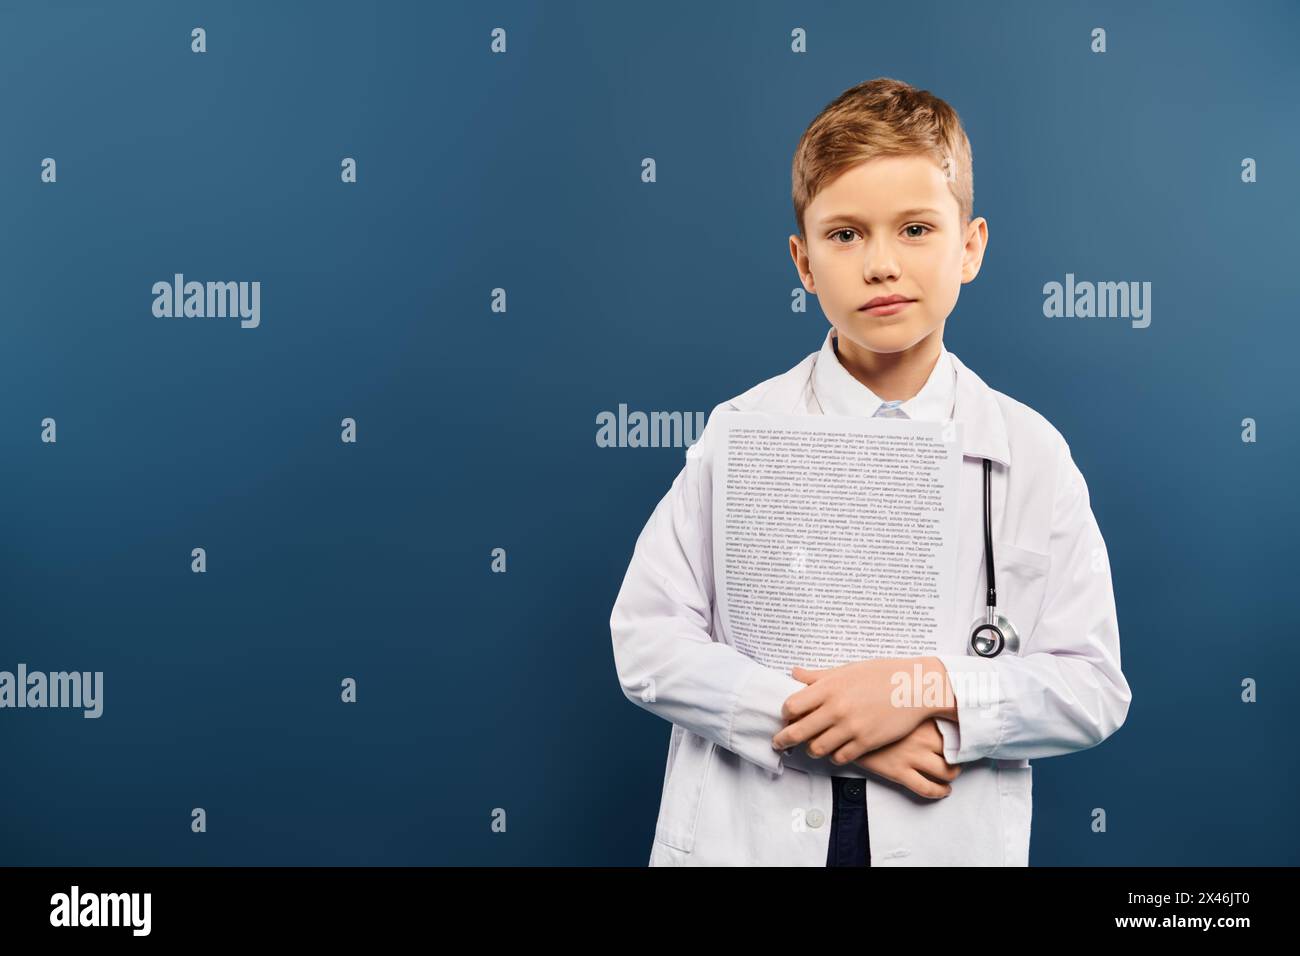 Young boy in white shirt and tie playing doctor with stethoscope on. Stock Photo